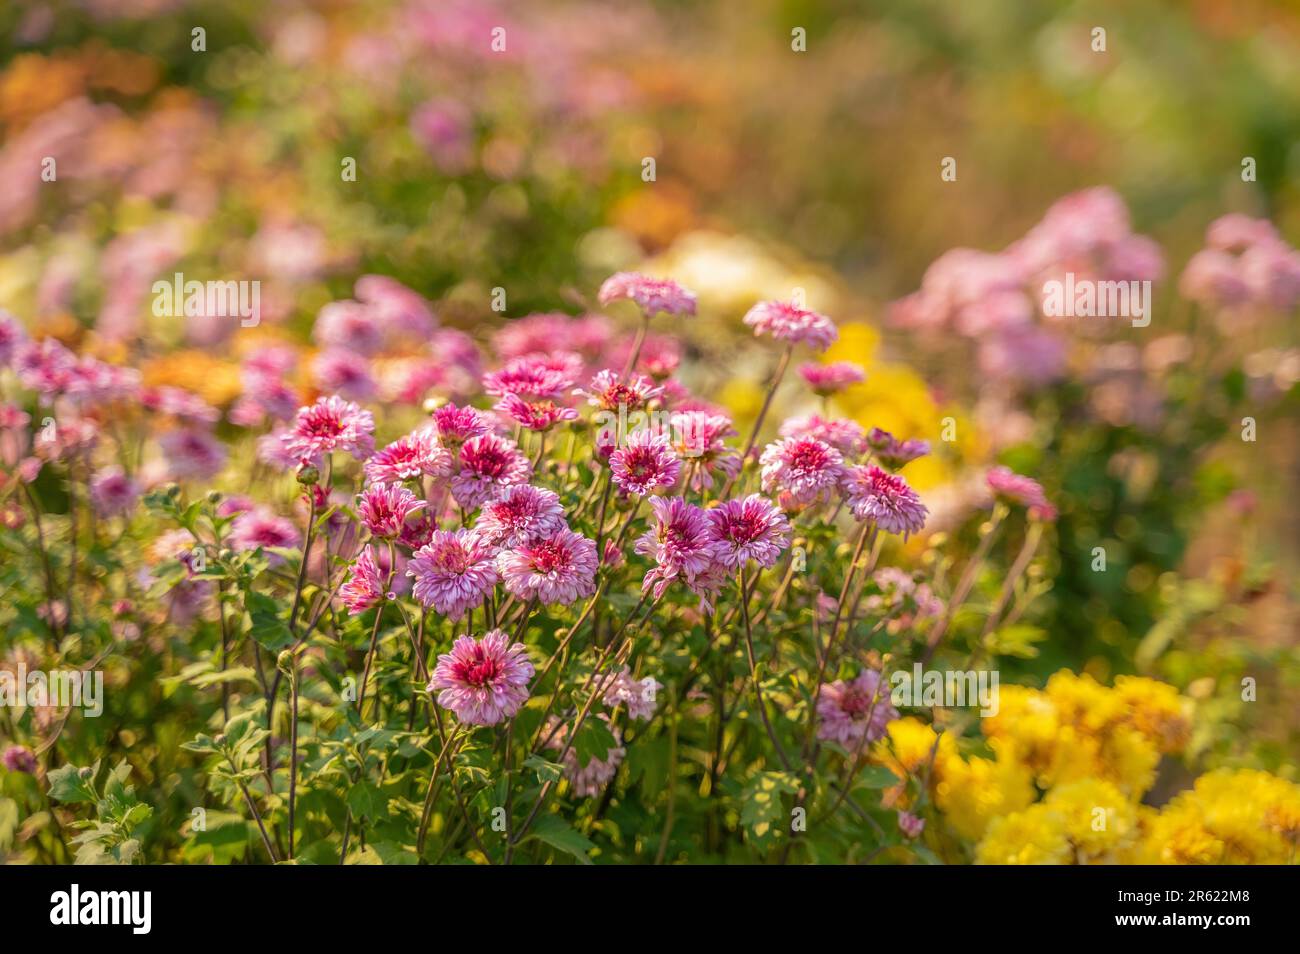 Many colorful flowers of chrysanthemum fully bloomed in the garden and blurry bokeh background of flowers. Selective focus used. Stock Photo